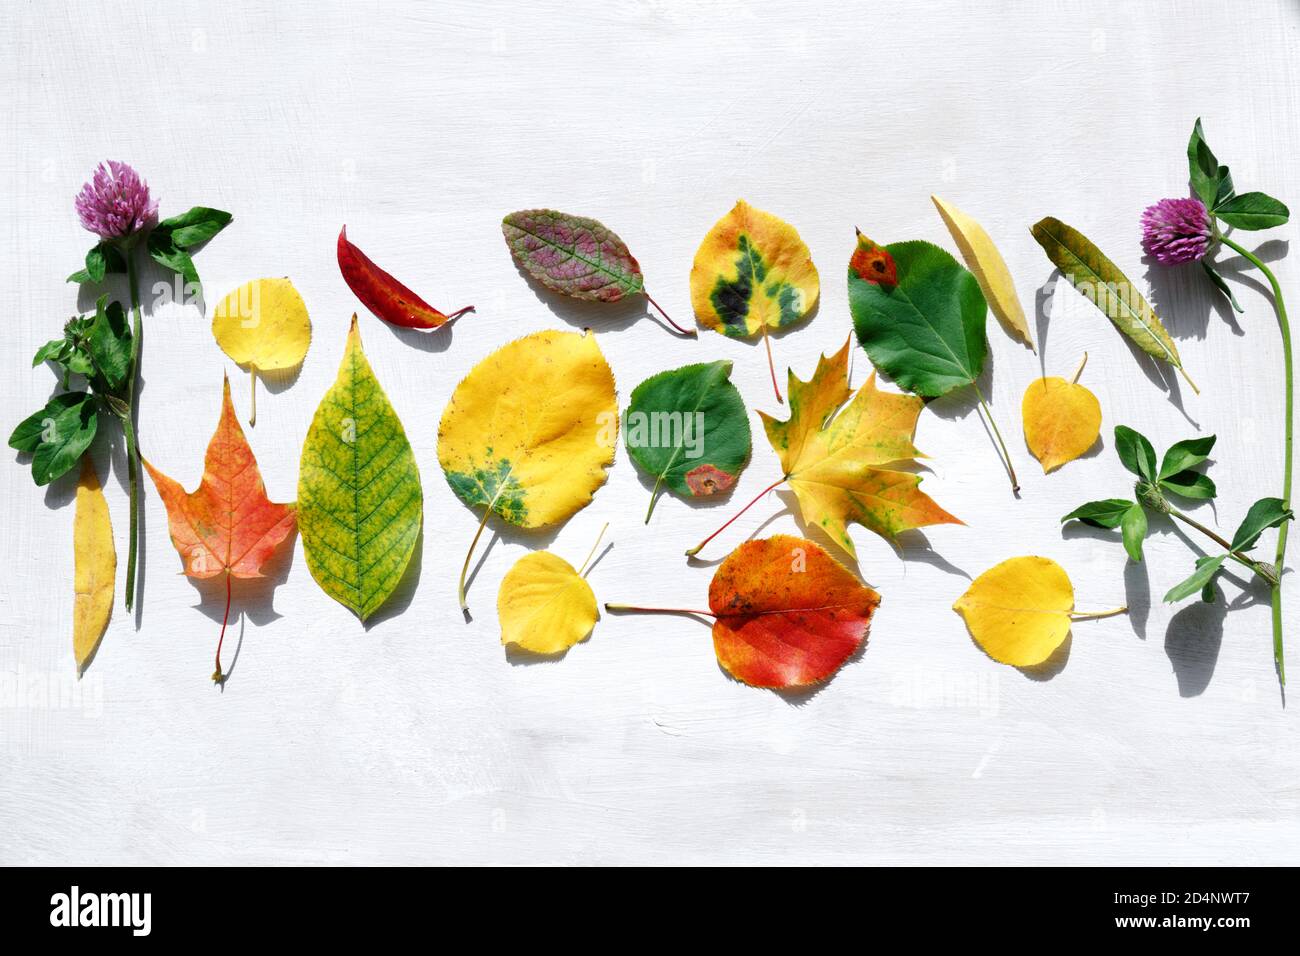 Autumn leaves of various trees are laid out on the surface. Bright red, yellow and green foliage for the herbarium. Autumn Golden time. Stock Photo